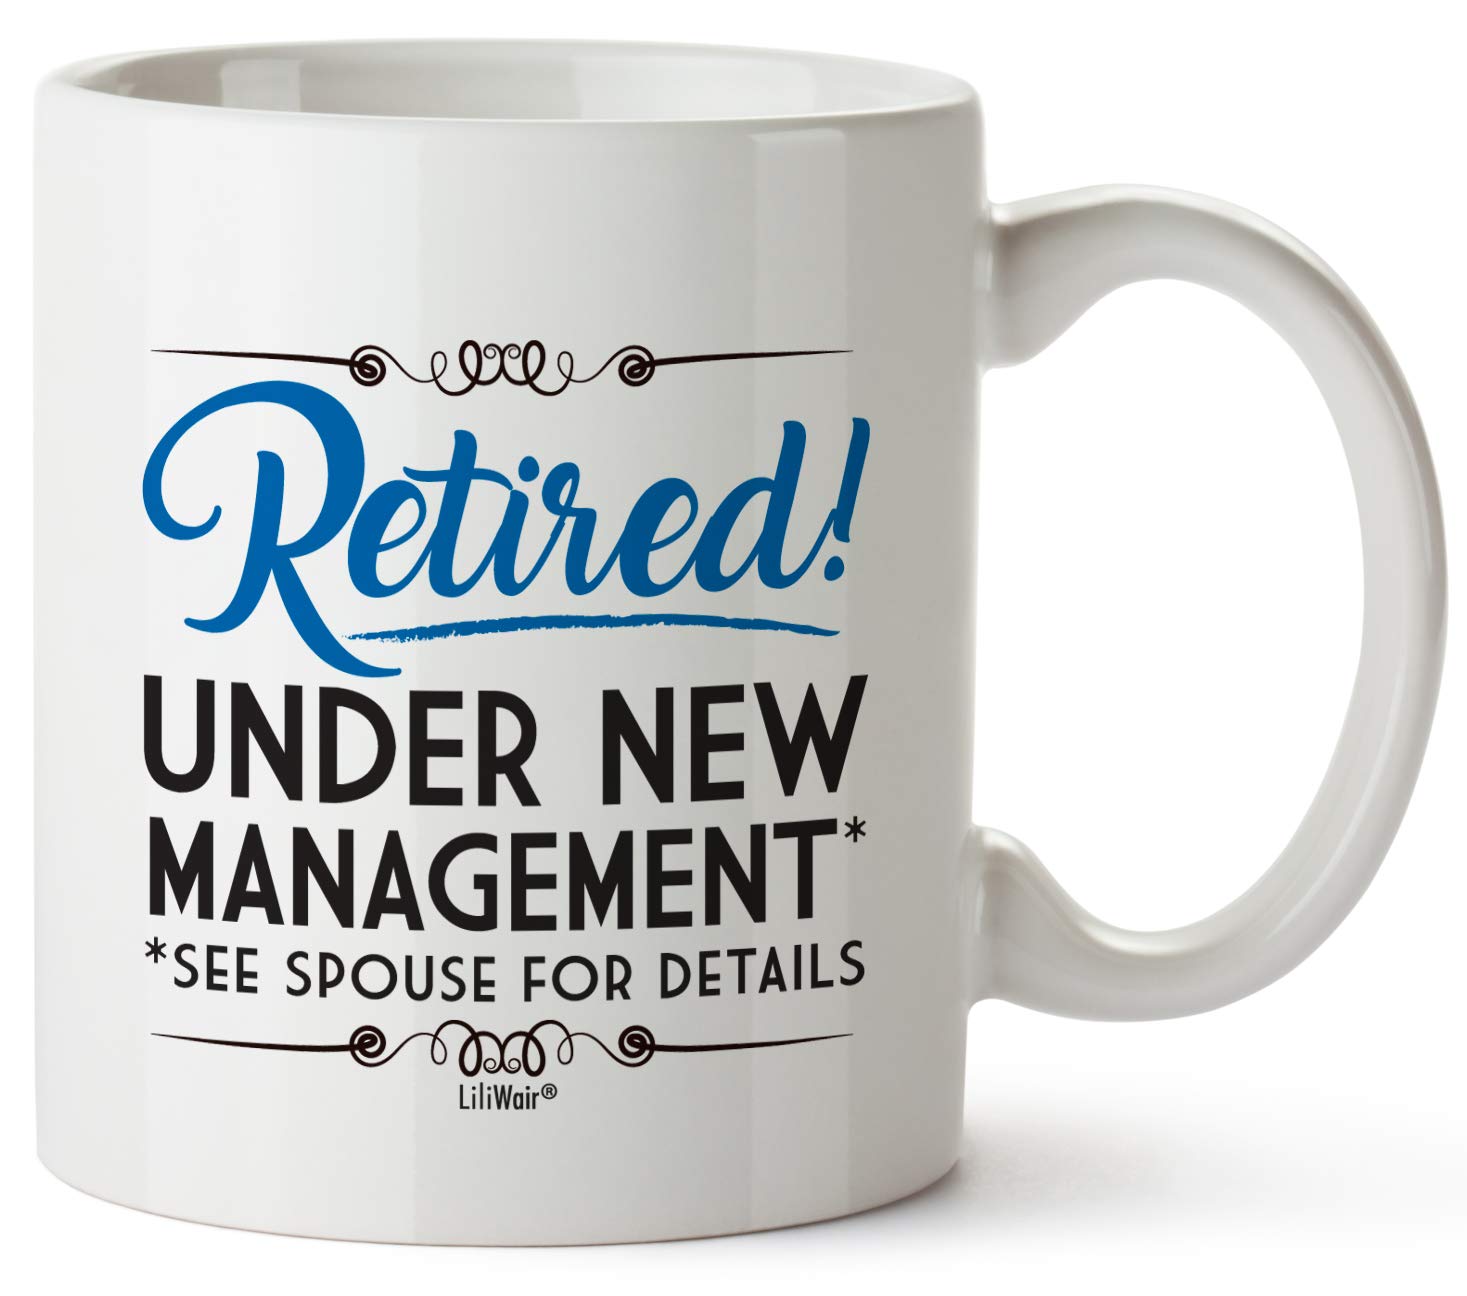 Book Cover Funny Retirement Gifts Gag for Men Women Dad Mom Valentines Day Husband Wife Boyfriend Humorous Retirement Coffee Mug Gift Retired Mugs for Coworkers Office & Family Unique Novelty Ideas for Her